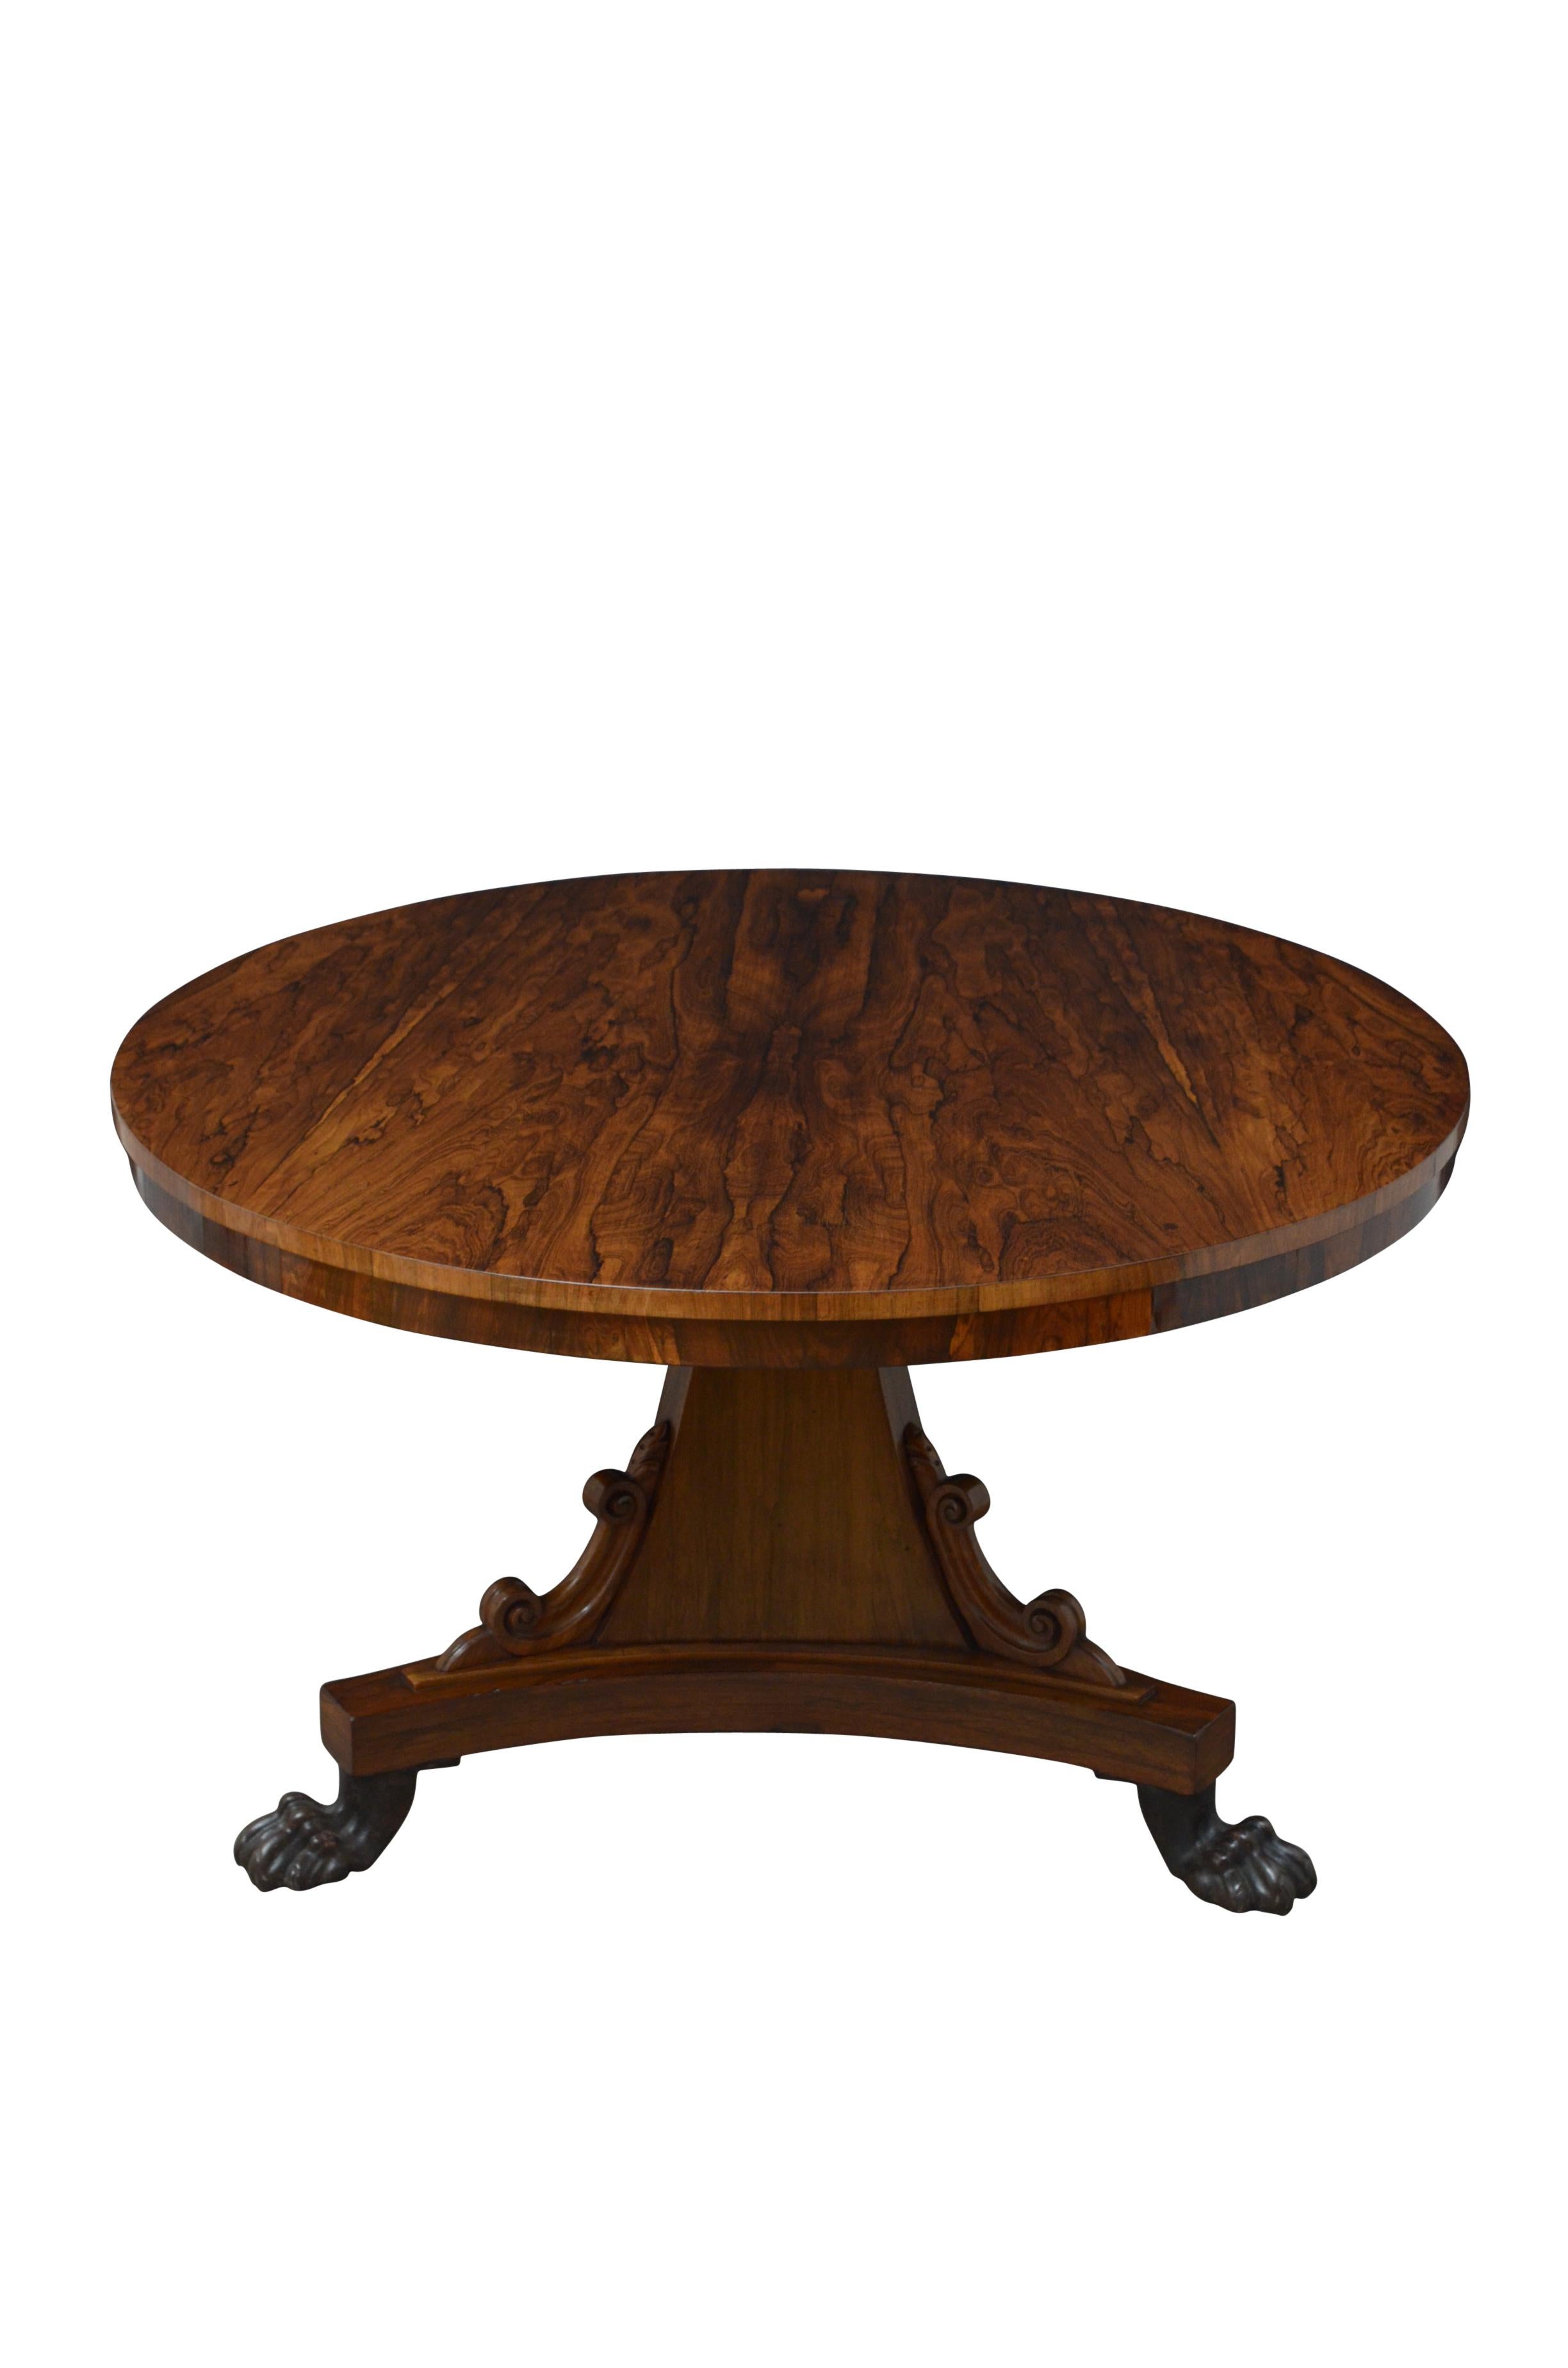 K0503 Superb William IV rosewood dining table / centre table, having tilt top with beautiful and very dramatic grain raised on three sided concave support with carved scrolls terminating in trefoil base and cast metal paw feet. This antique